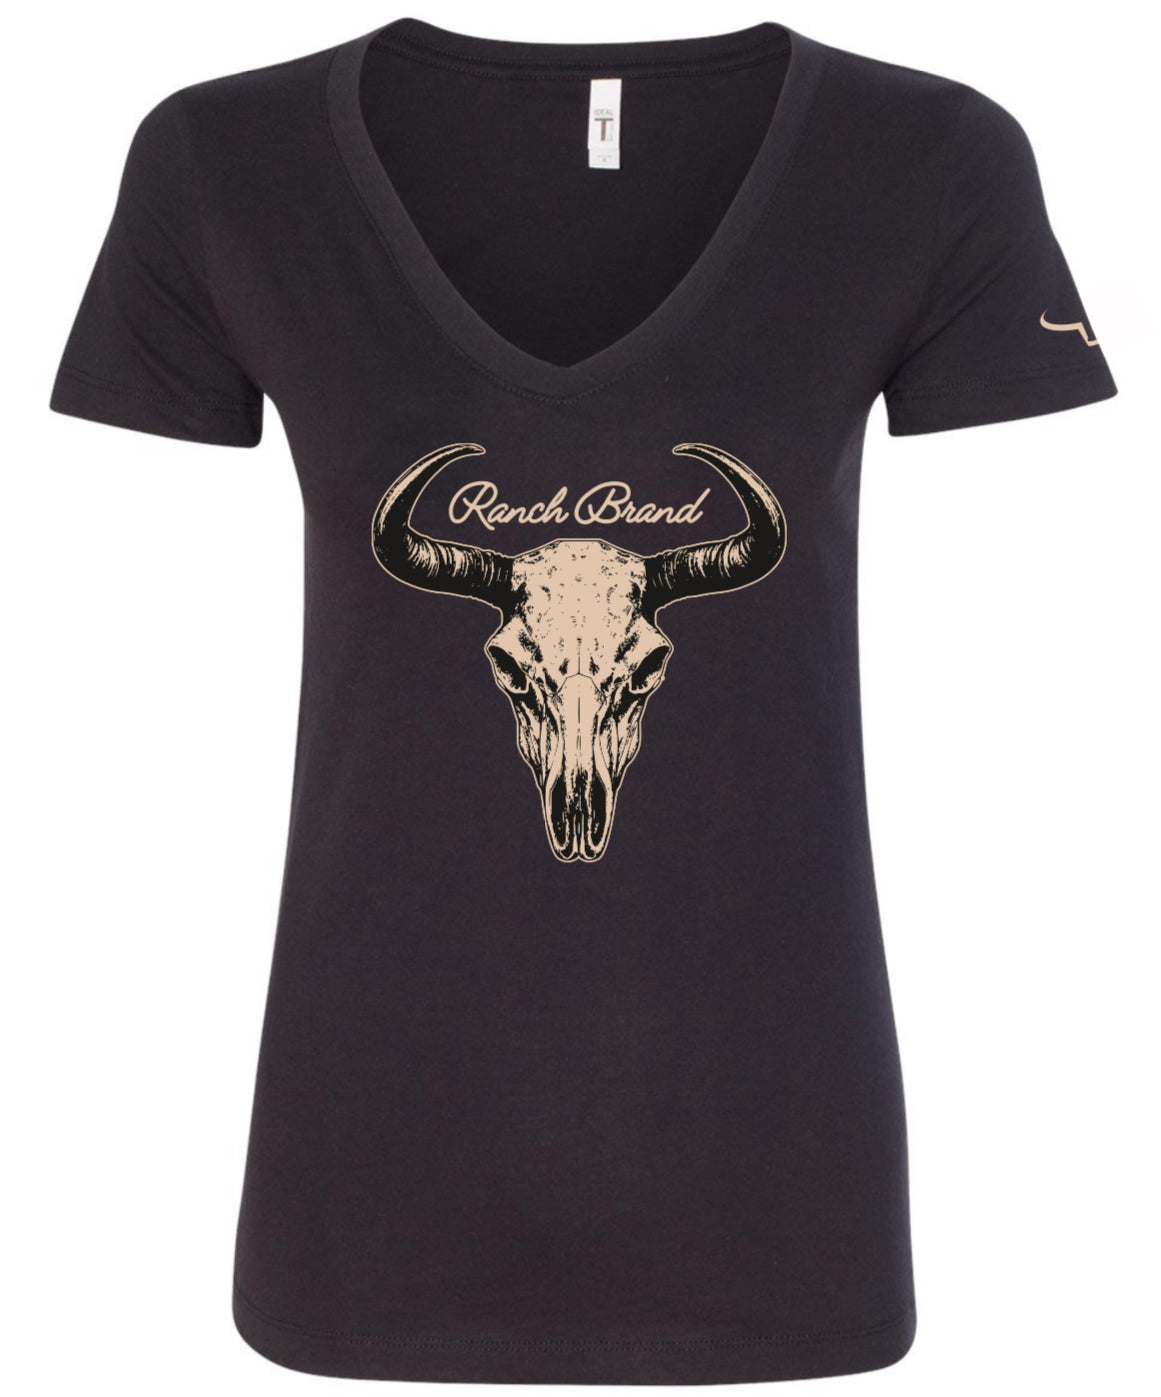 Western cattle brand for your western Ranch, cattle ranch, farm